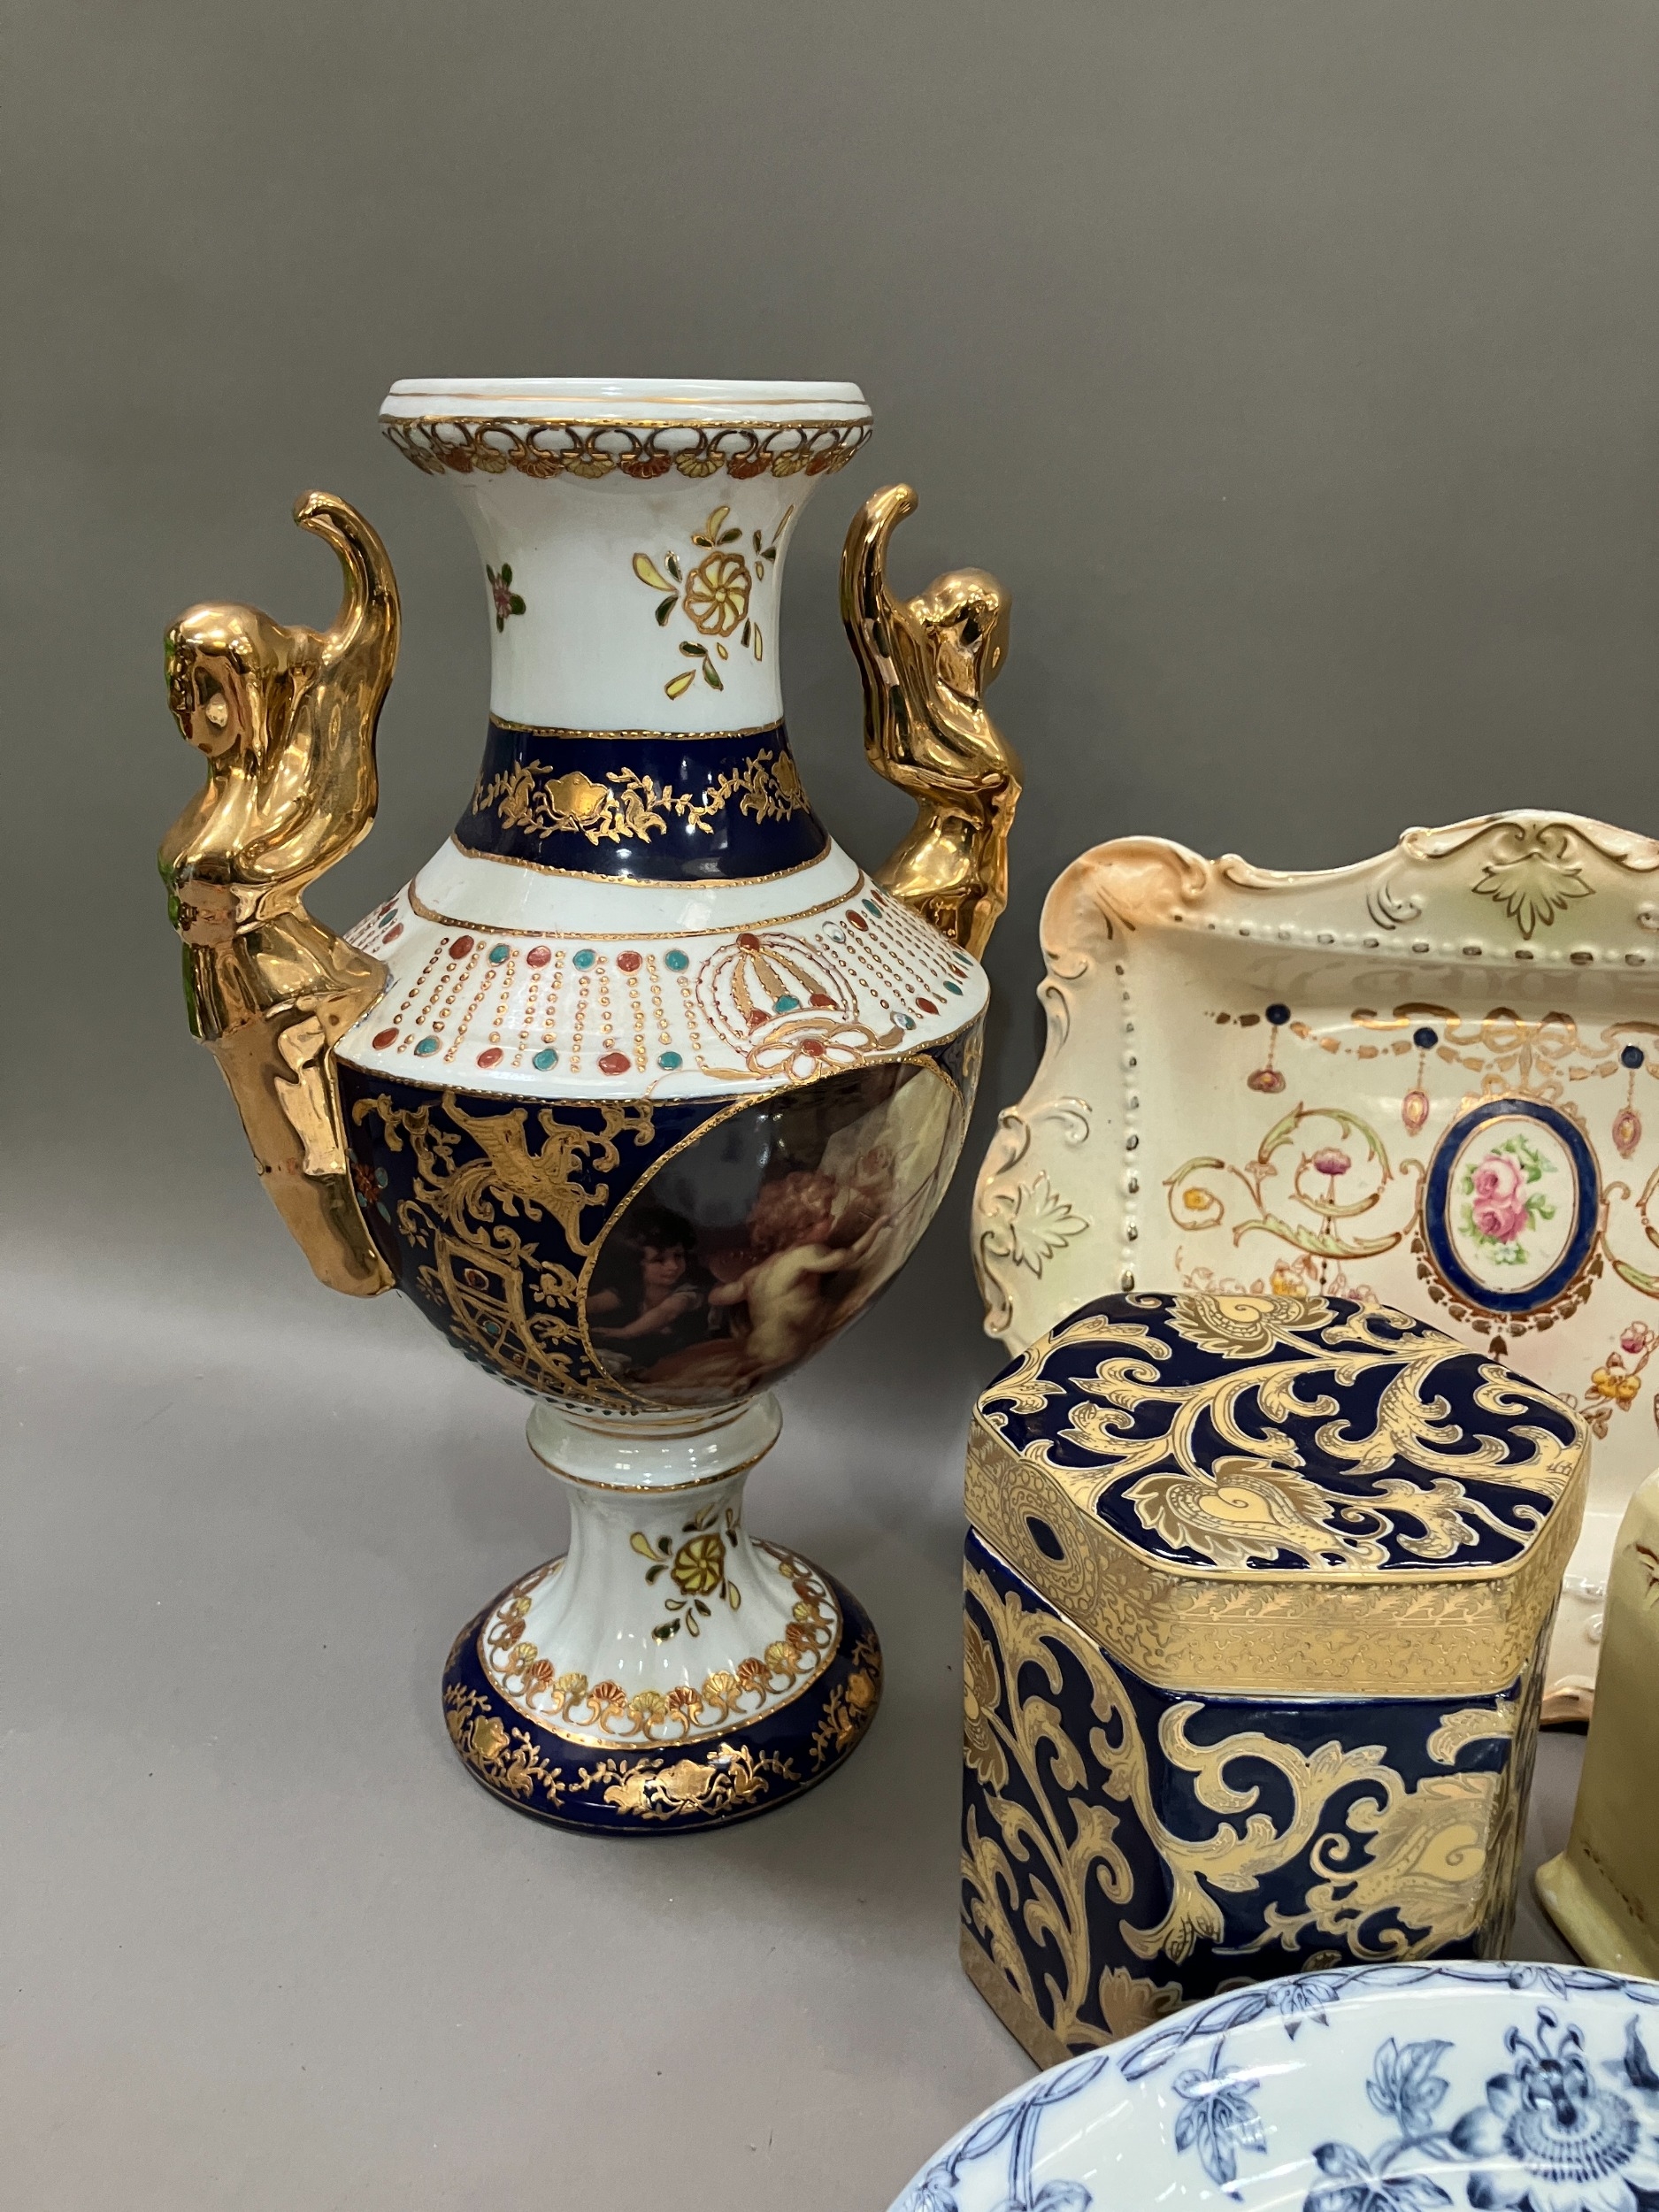 A Satsuma style vase with flared rim and twin dragon handles with cartouches filled with figures - Image 2 of 5